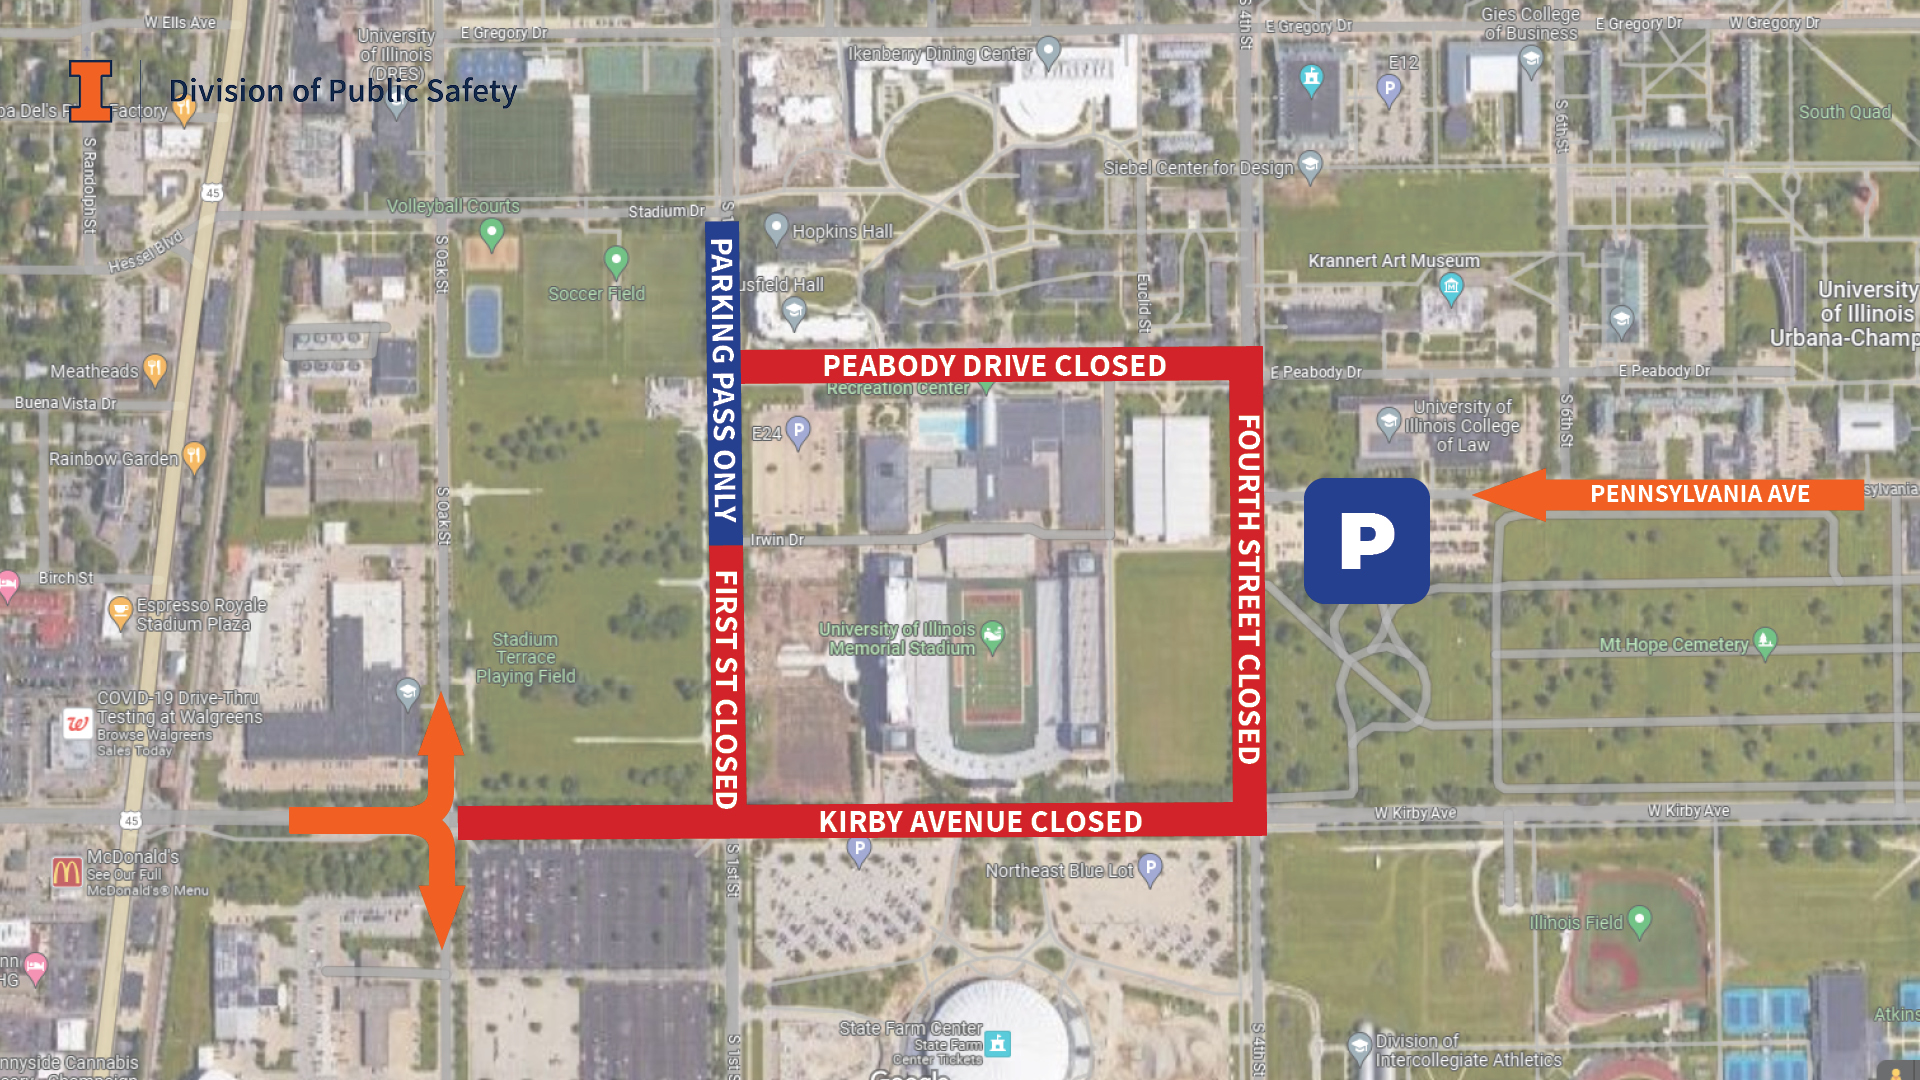 Map displaying street closures around Memorial Stadium. Sections of Peabody Drive, First Street, Fourth Street and Kirby Avenue are highlighted in red to delineate closures. Additionally, a parking option is highlighted at Fourth Street and Pennsylvania Avenue.